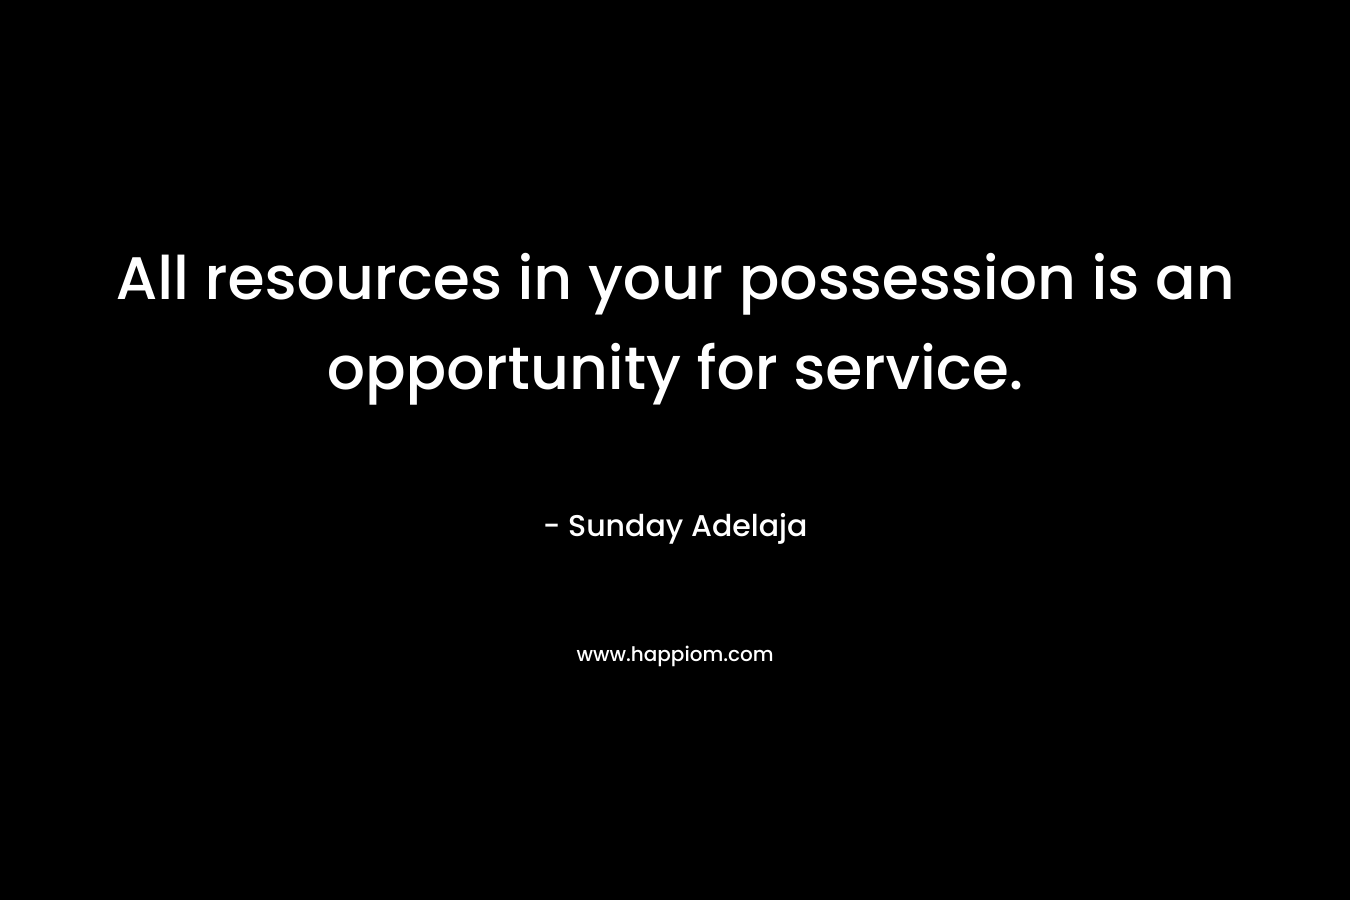 All resources in your possession is an opportunity for service.